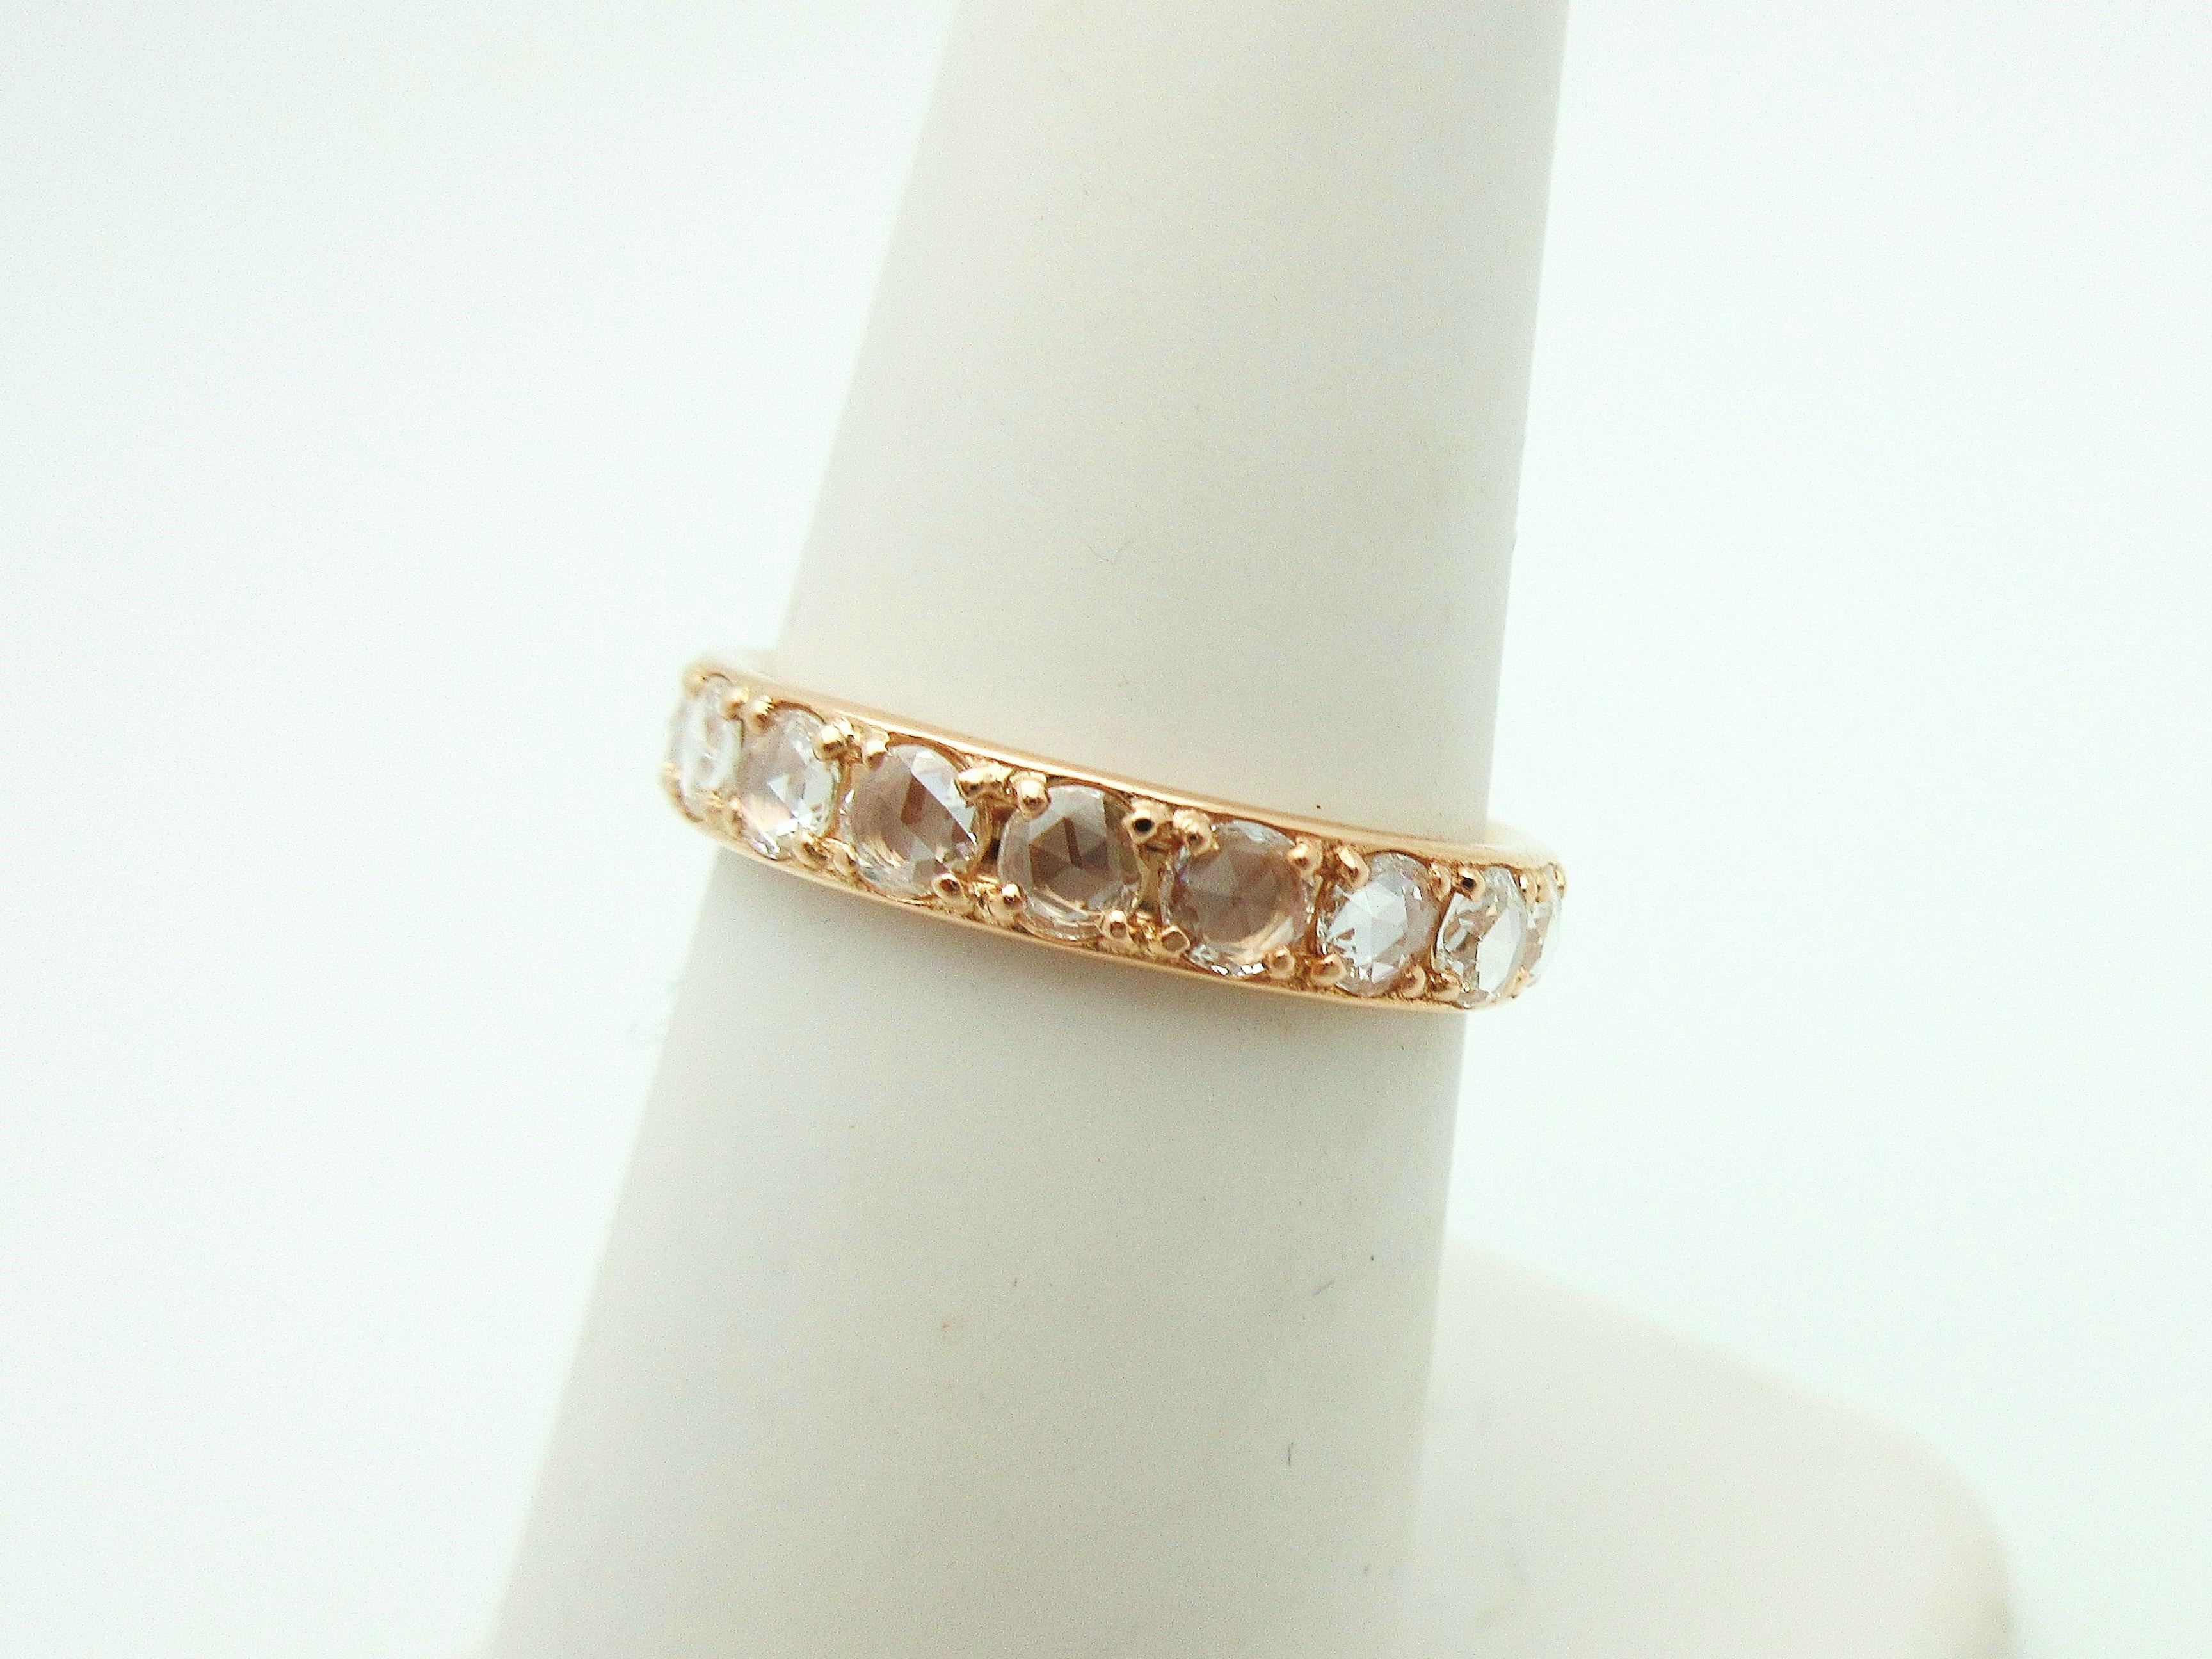 This gorgeous Tiffany & Co eternity band from the Metro Collection brings antiquity into the mainstream.  The 18k rose gold ring is set with 18 sparkling rose cut diamonds weighing approximately 1.14cttw.  The 3.75mm band can be stacked with other